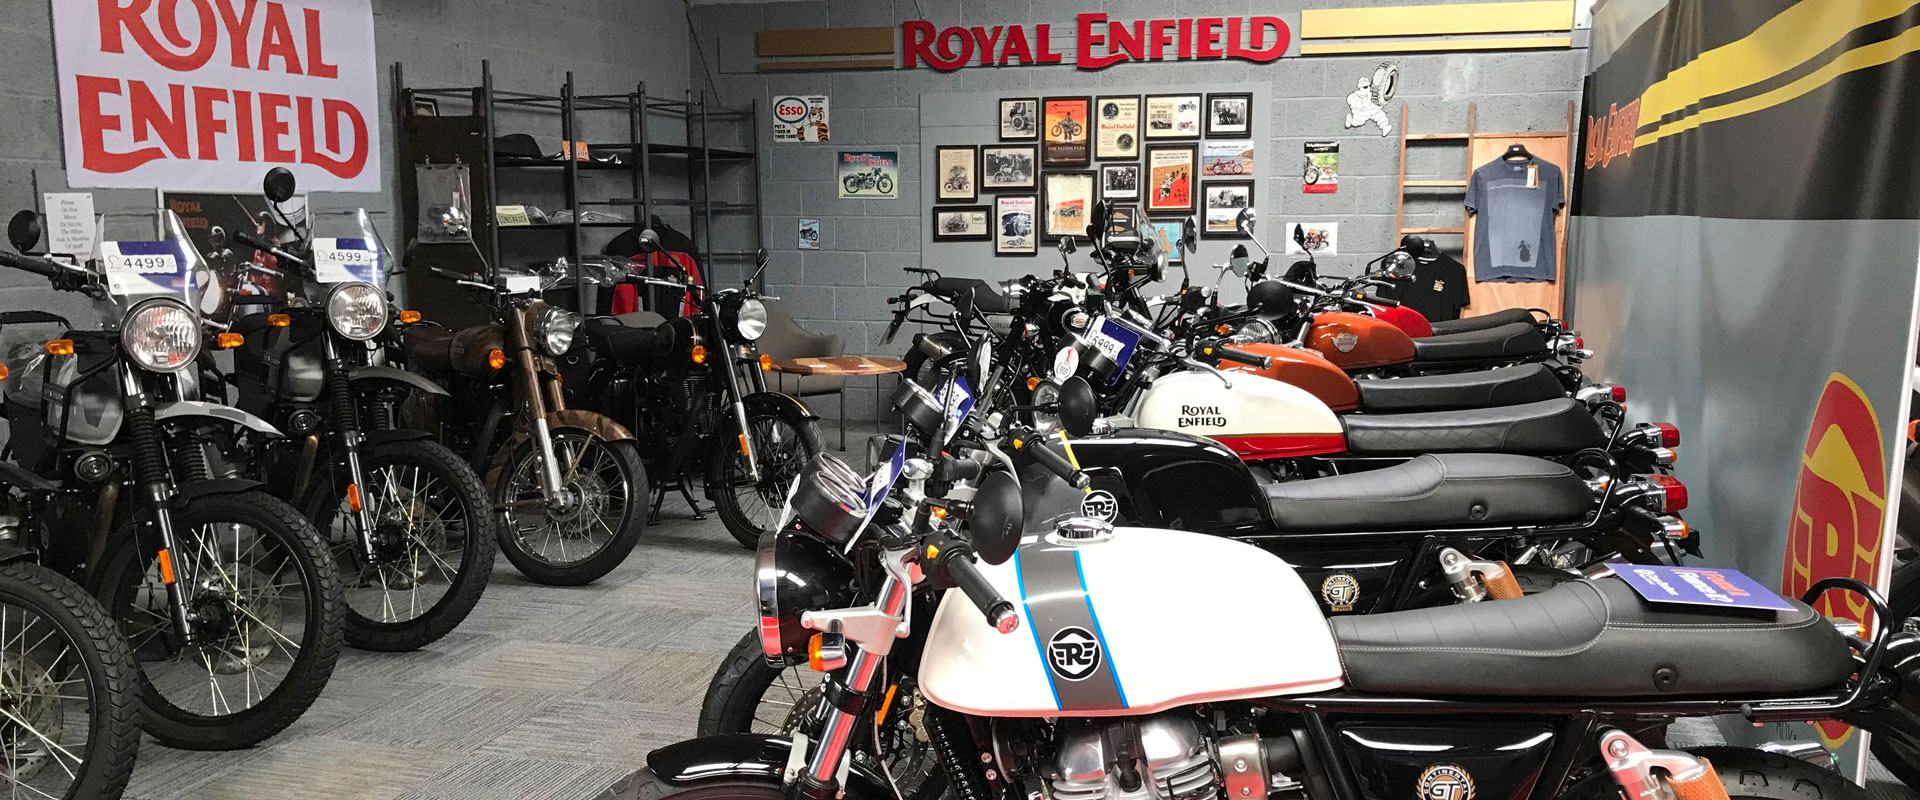 Take a look inside our Royal Enfield motorcycle showroom in Louth, Lincolnshire